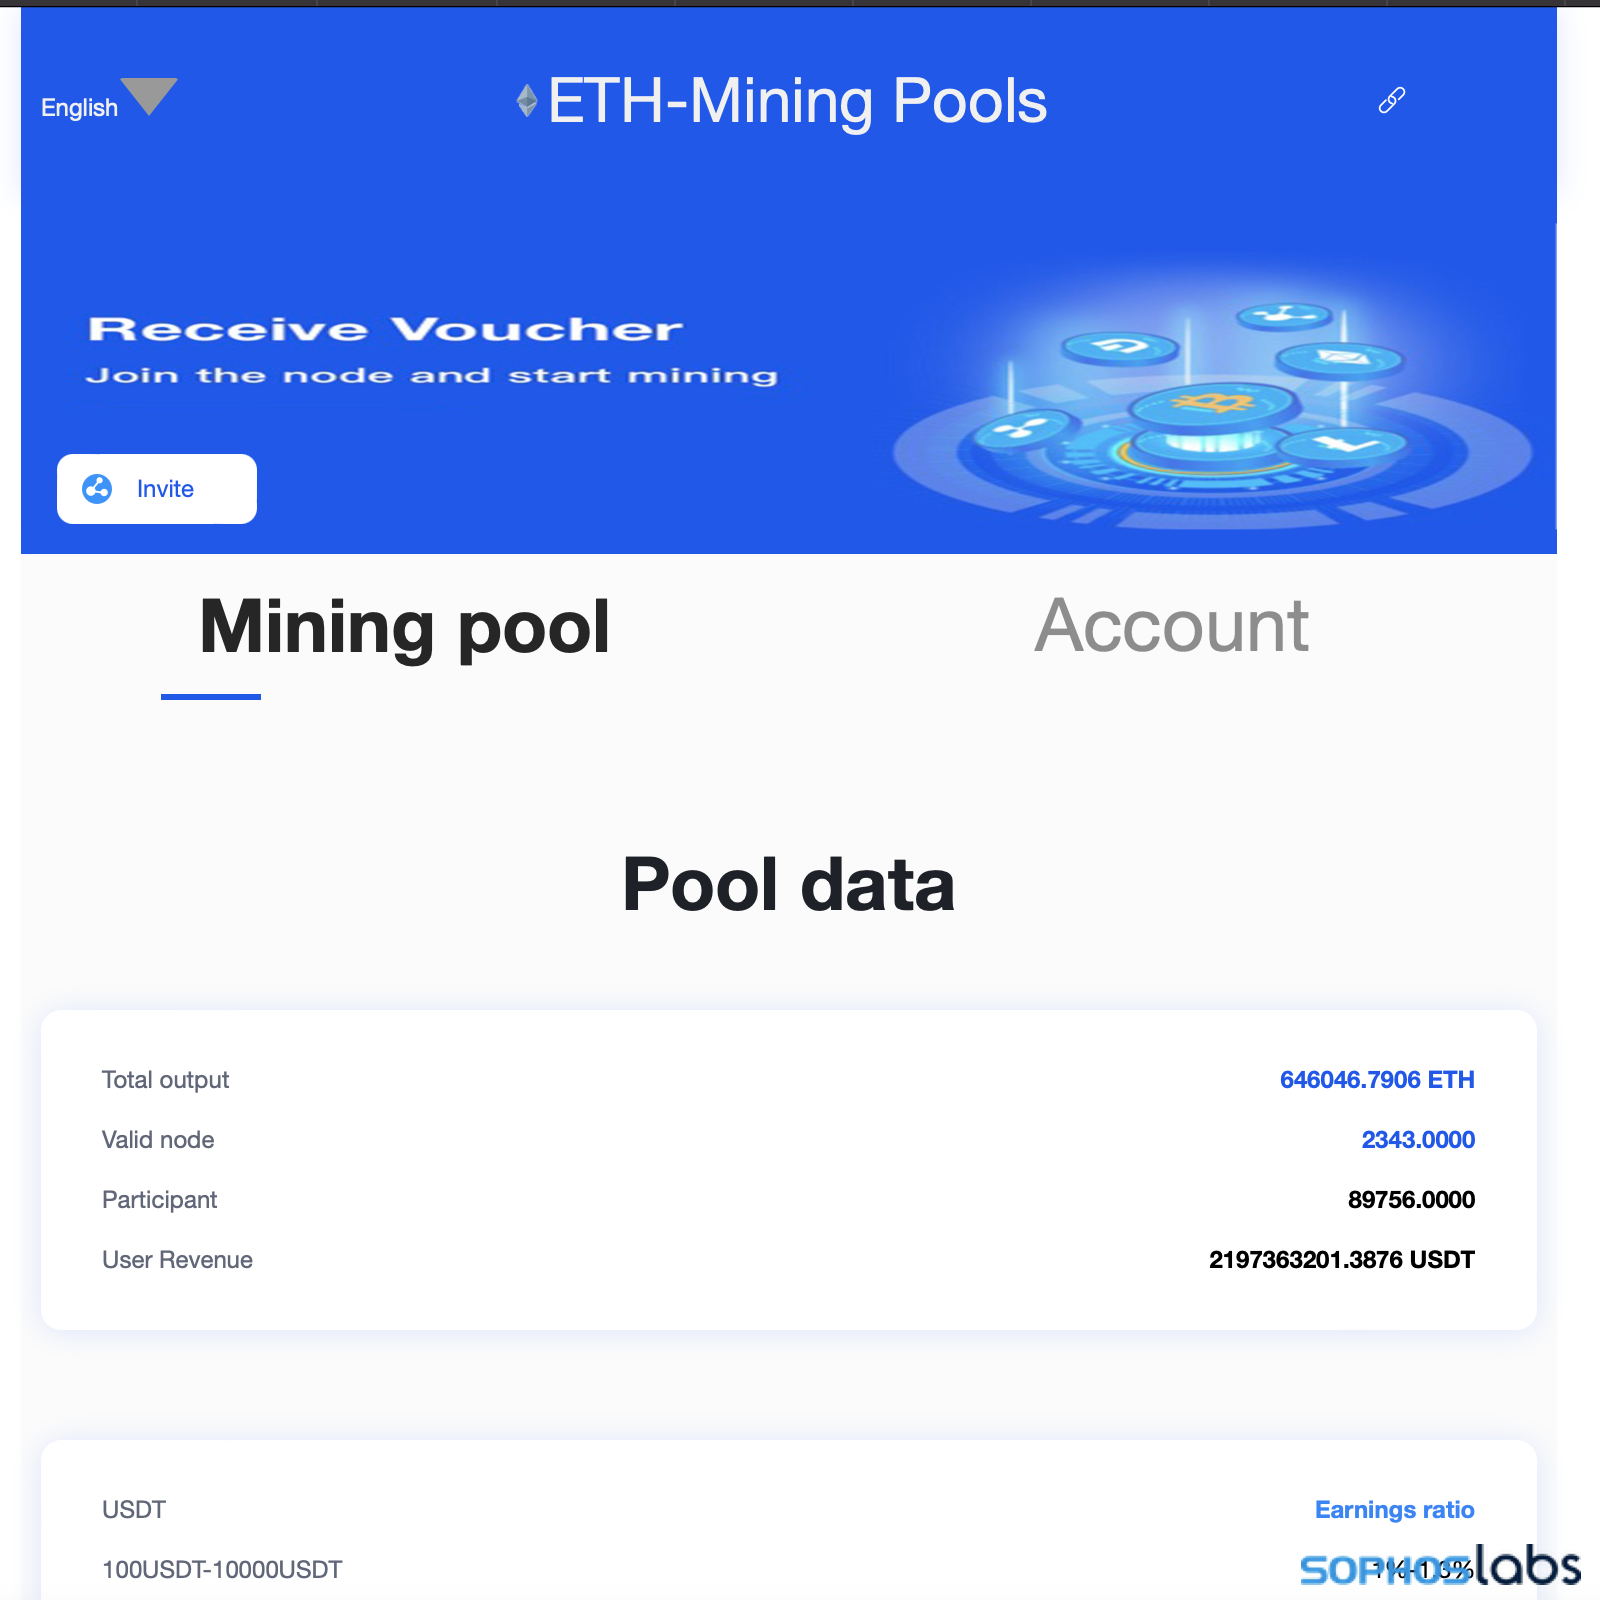 A Review of Commission Programs: Which Mining Pool Offers Reliability and High Returns?